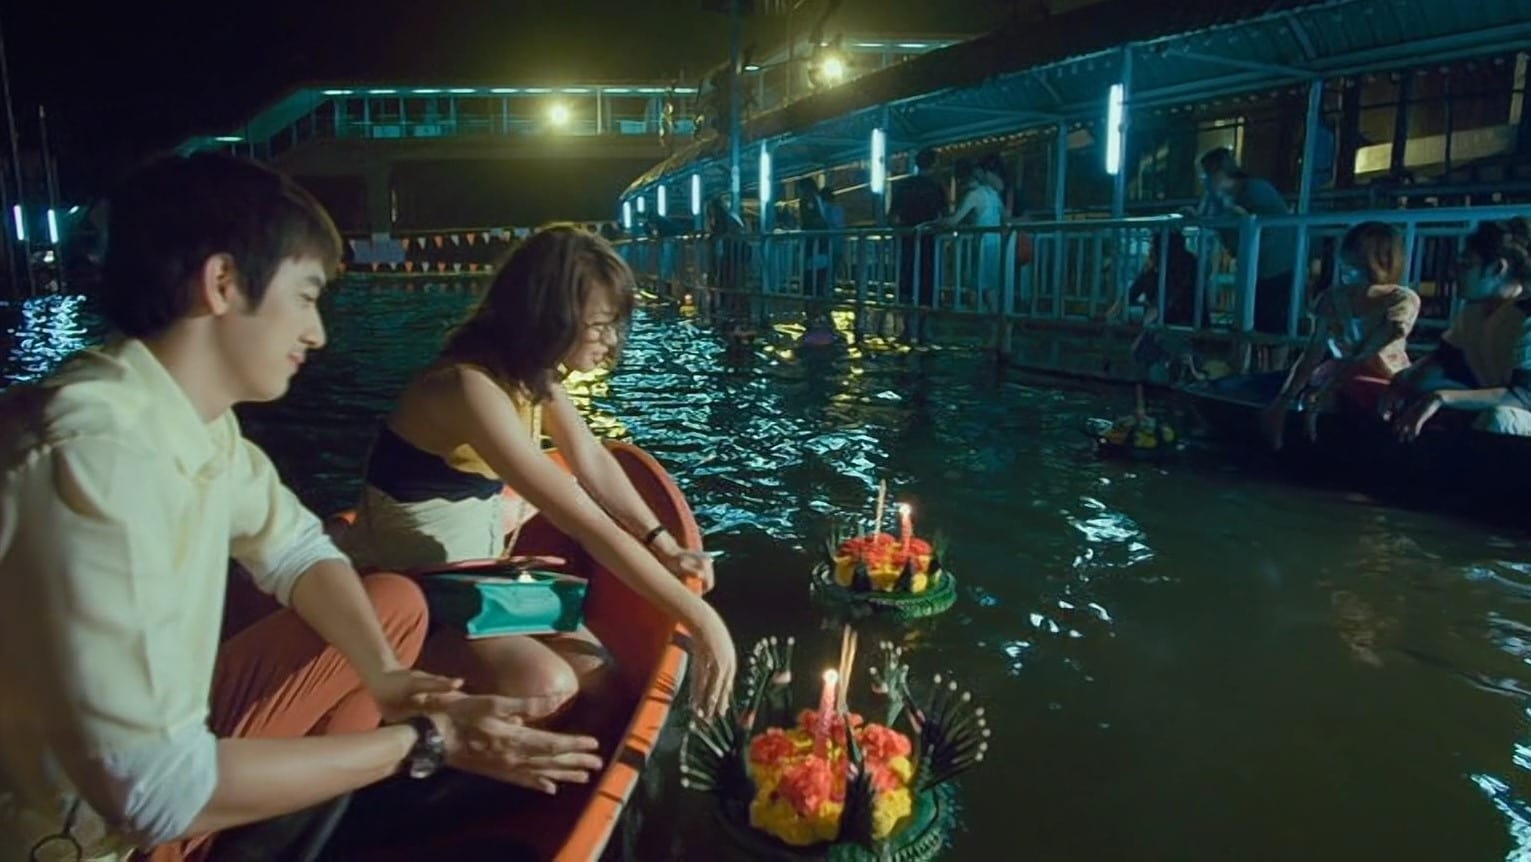 Love at First Flood (2012)